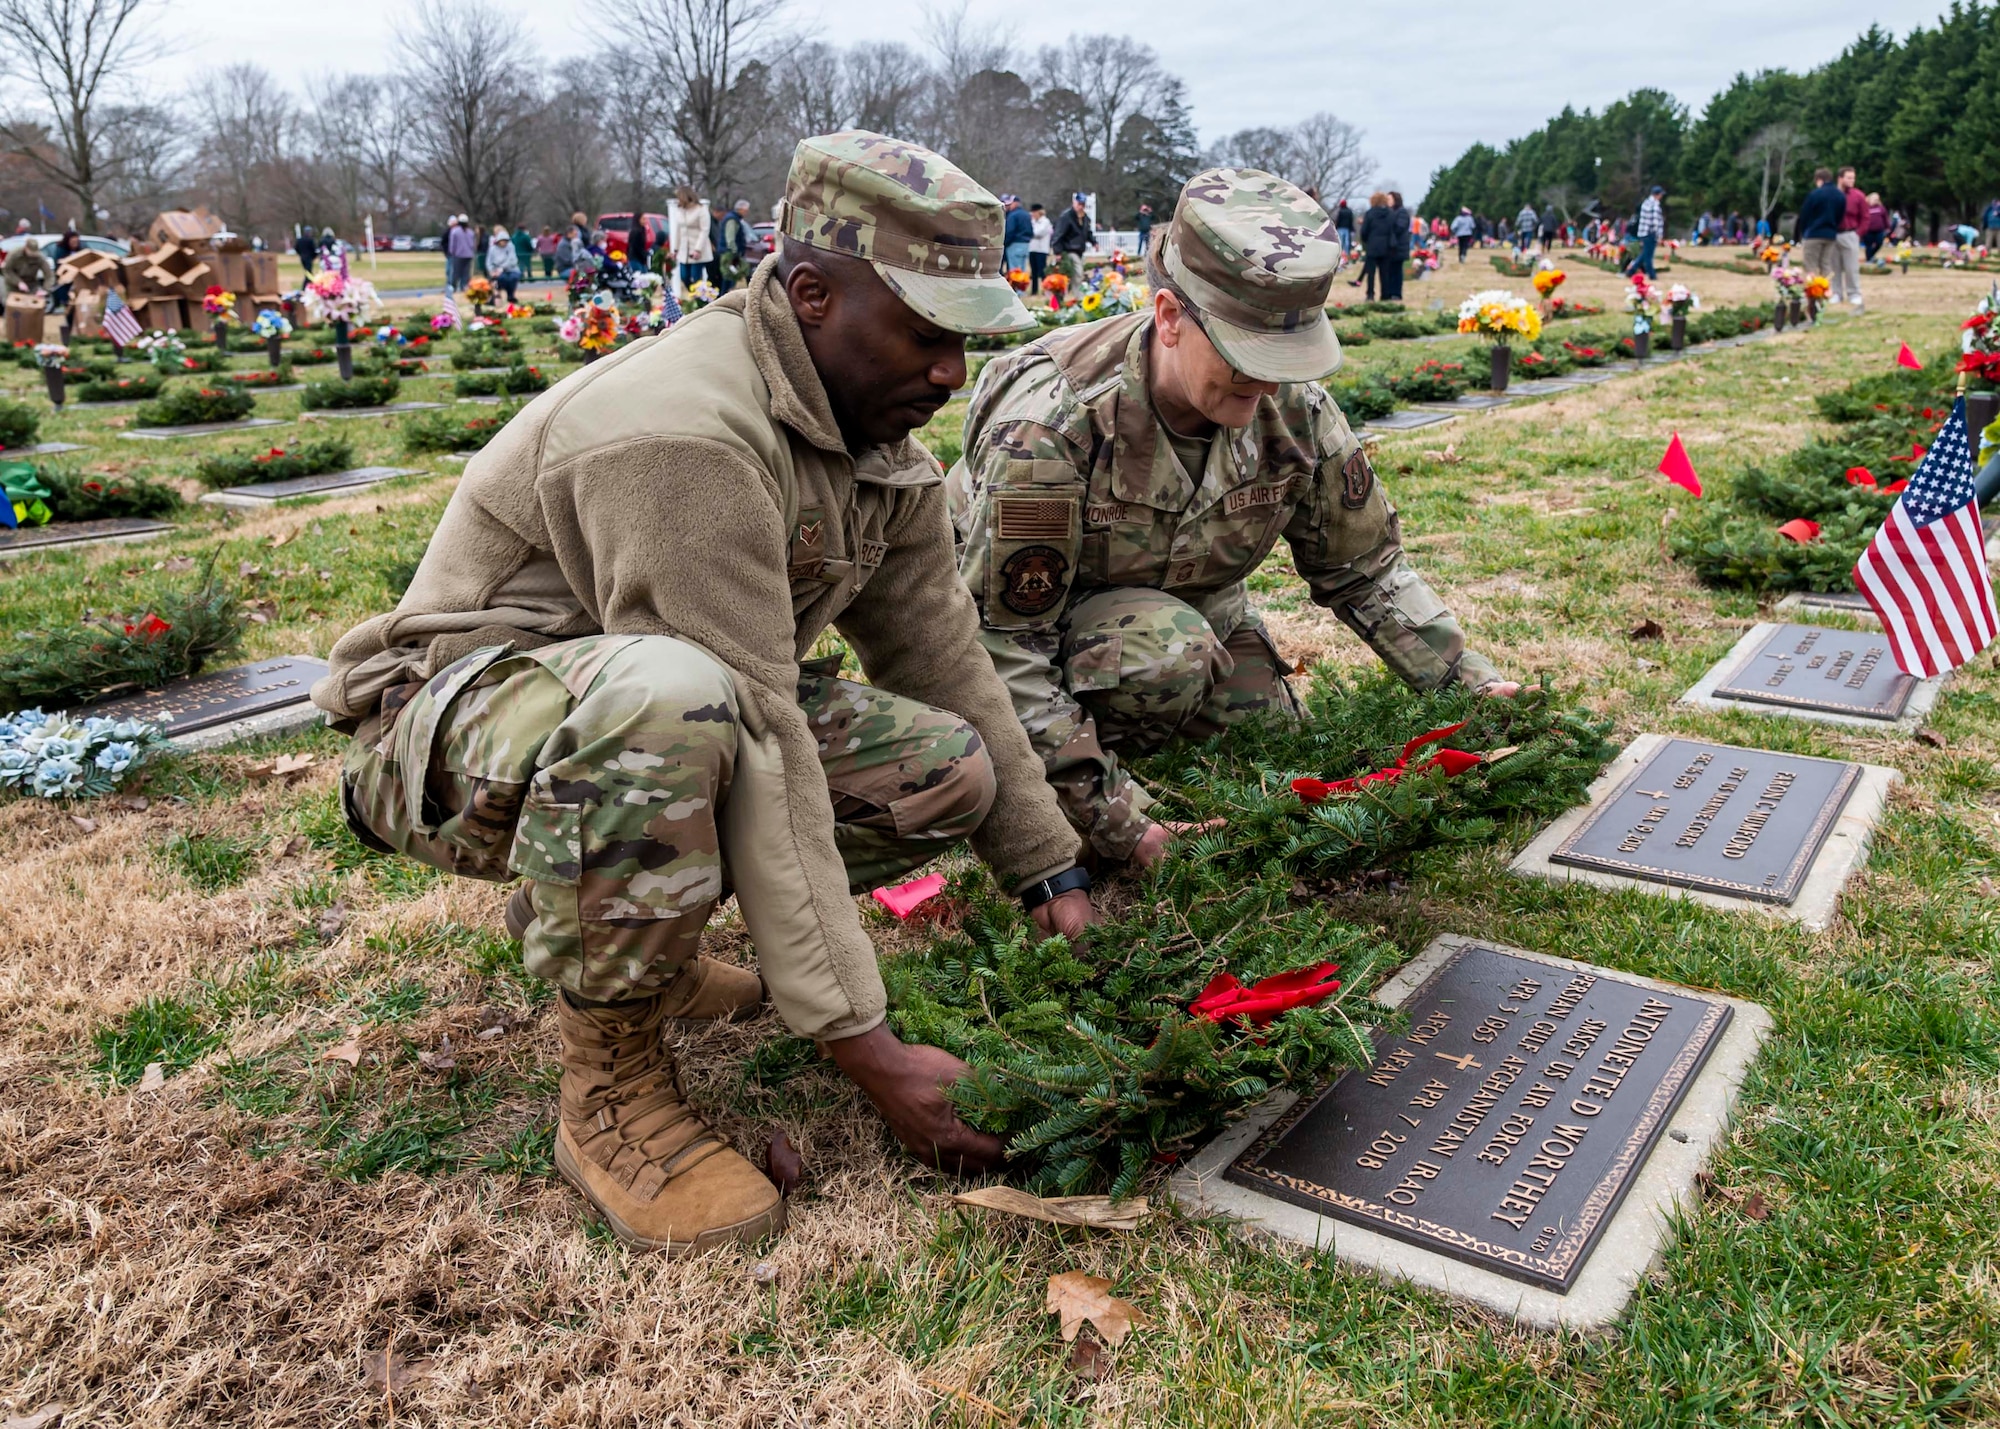 Airmen from the 512th Mortuary Affairs Squadron lay wreaths on a grave at the Delaware Veterans Memorial Cemetery in Millsboro, Delaware, Dec. 18, 2021. Each December, on National Wreaths Across America Day, wreath laying ceremonies are held across the country at more than 2,100 cemeteries, honoring veterans and those who have fallen. (U.S. Air Force photo by Senior Airman Stephani Barge)